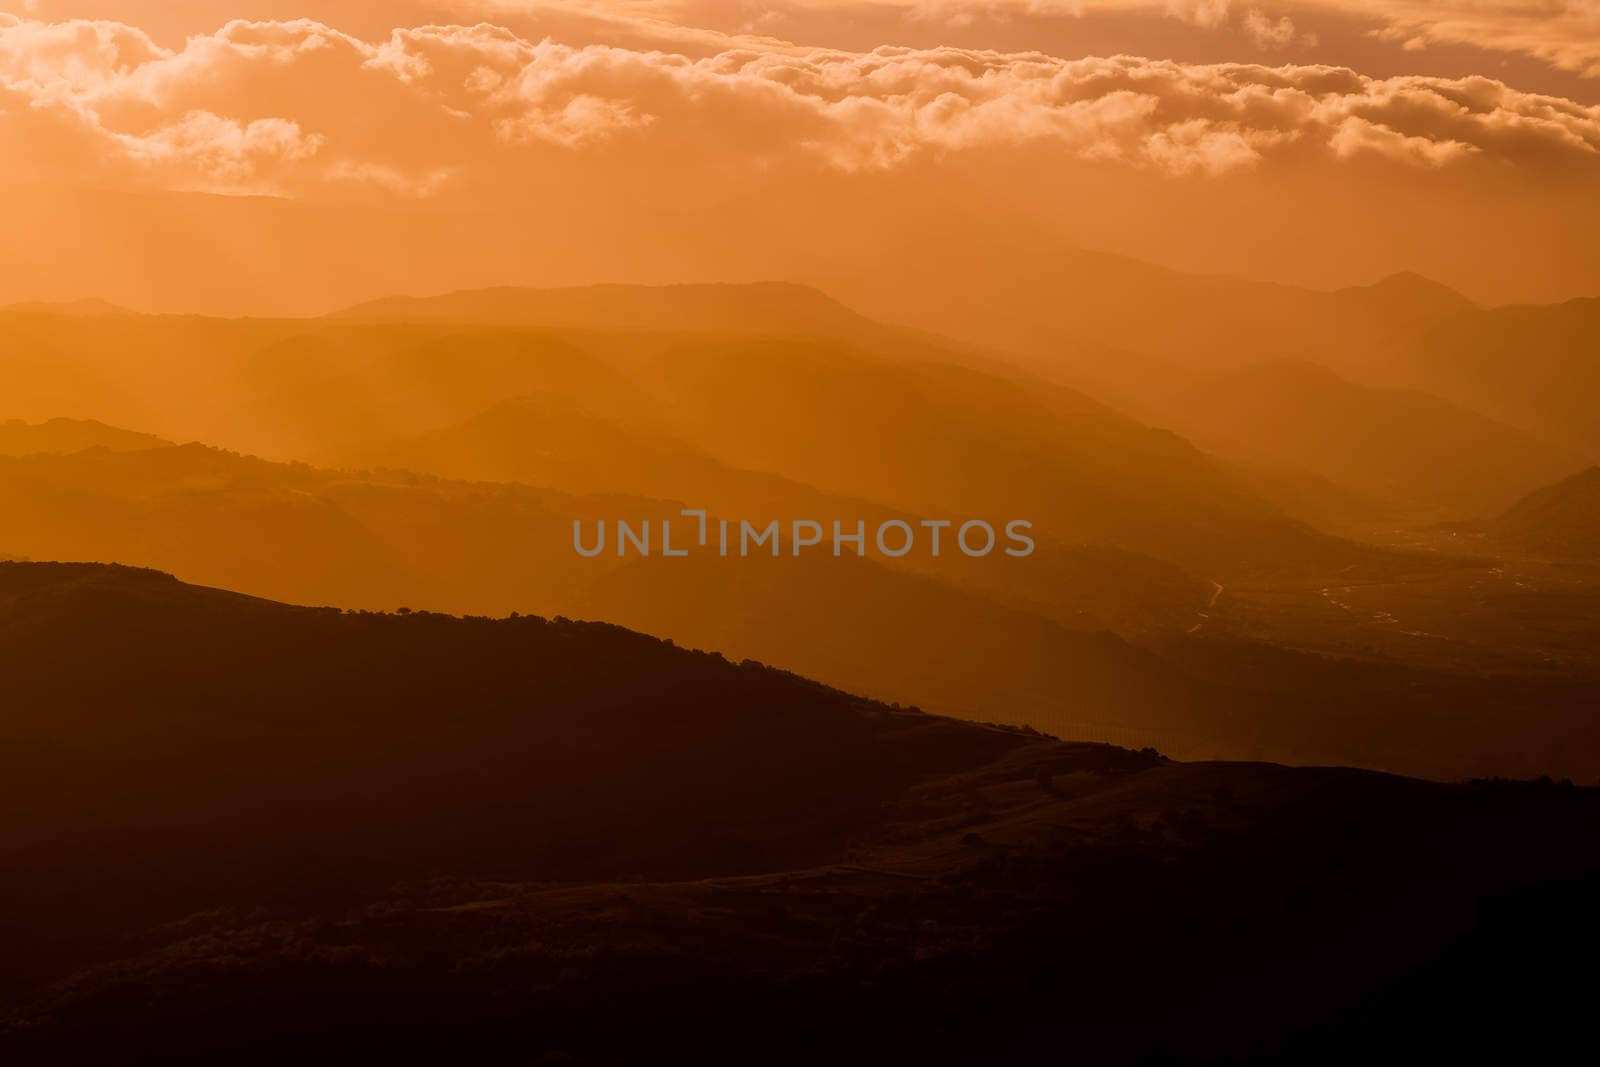 mountains silhouette at sunset with fog, natural light tint blue